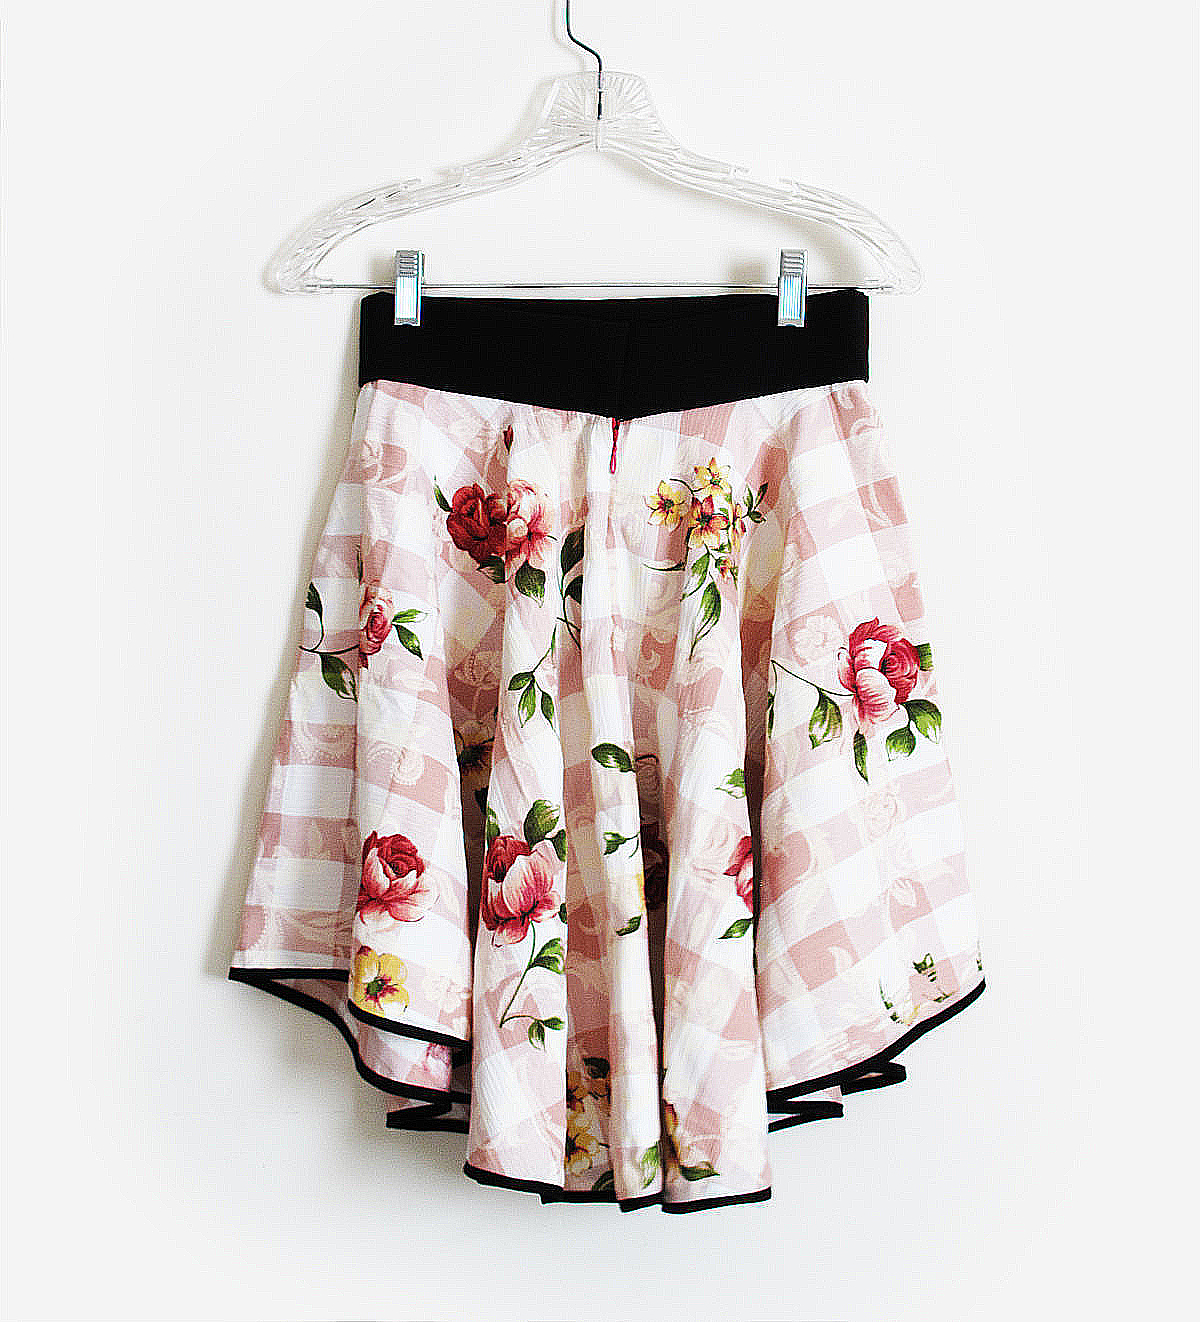 Floral Gingham Skirt With Constrasting Black Details, Size Small on Luulla